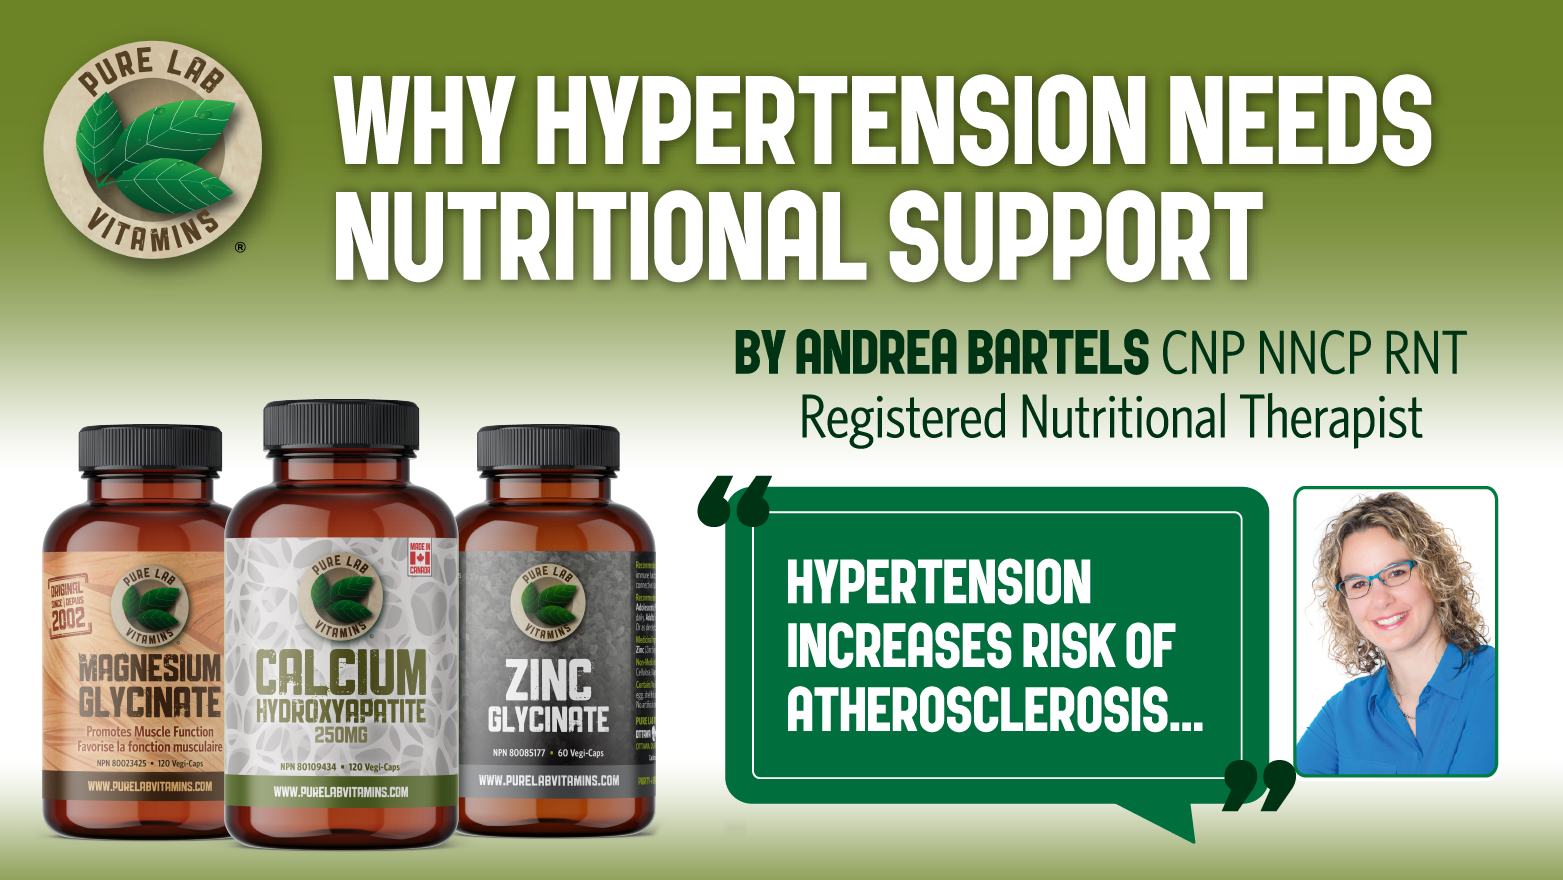 Why Hypertension Needs Nutritional Support